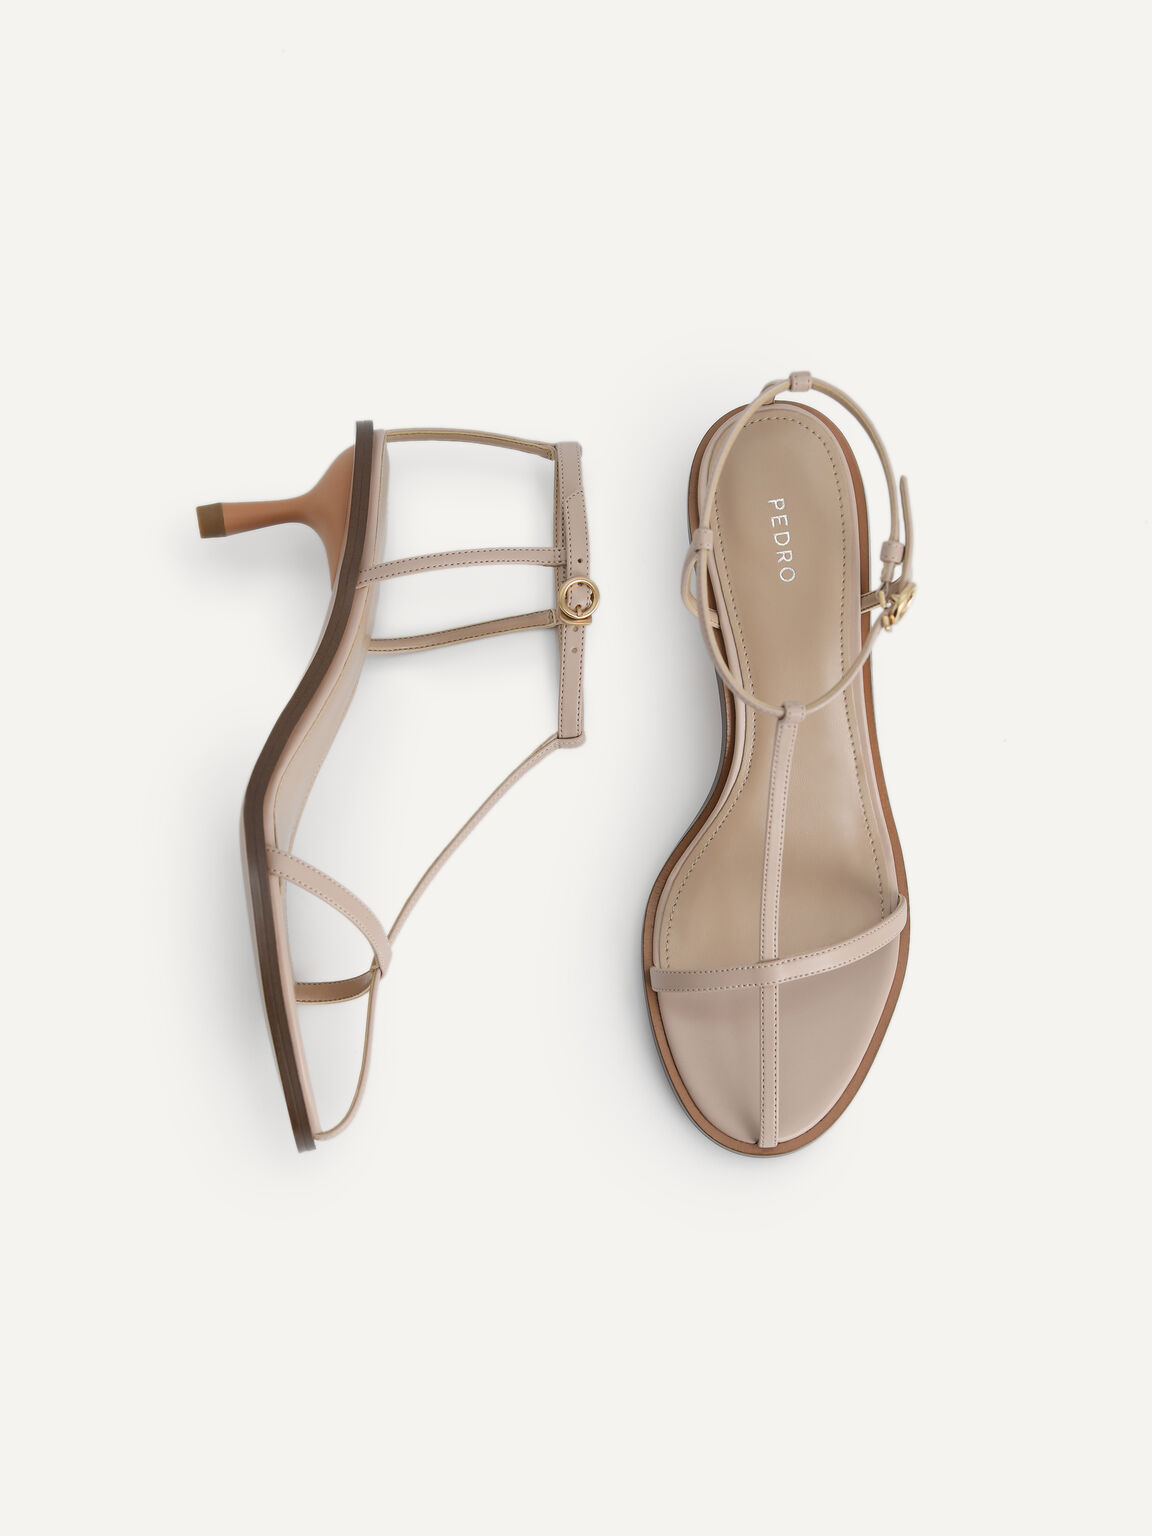 Ankle-Strap Heeled Sandals, Nude